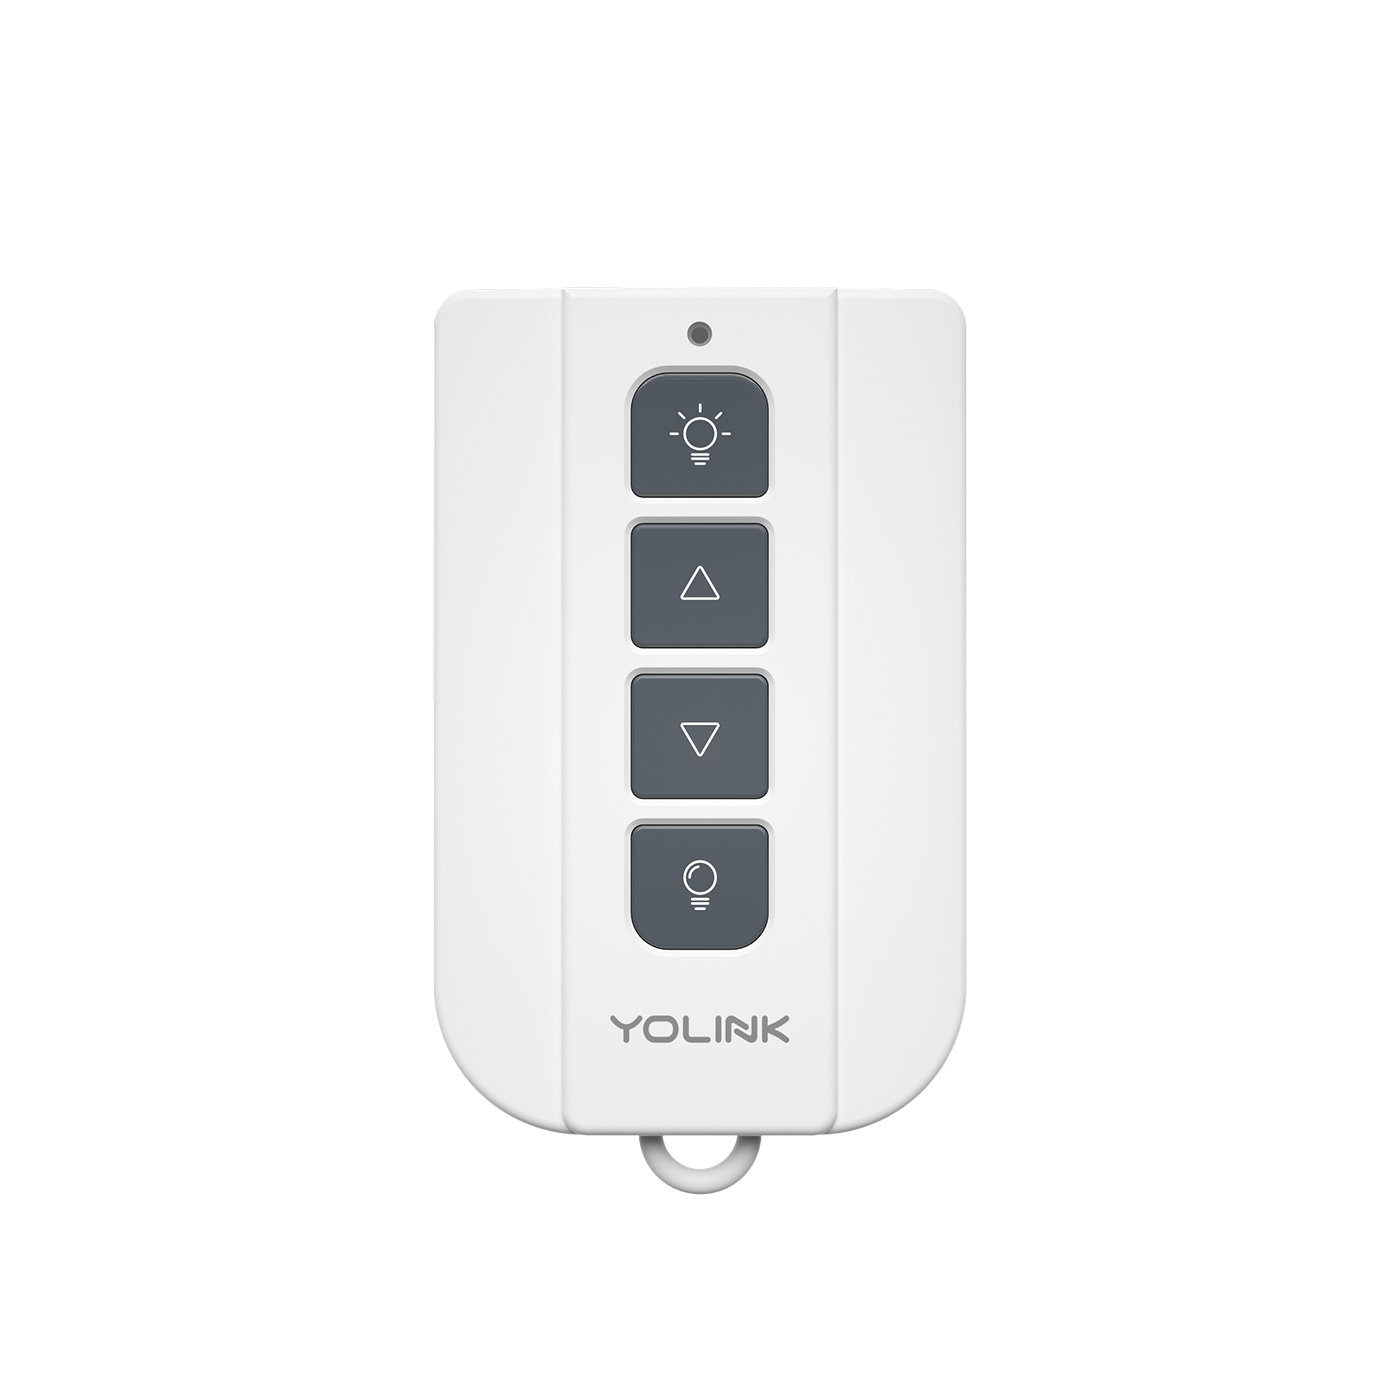 DimmerFob, Smart Fob for use with YoLink Dimmer Switches